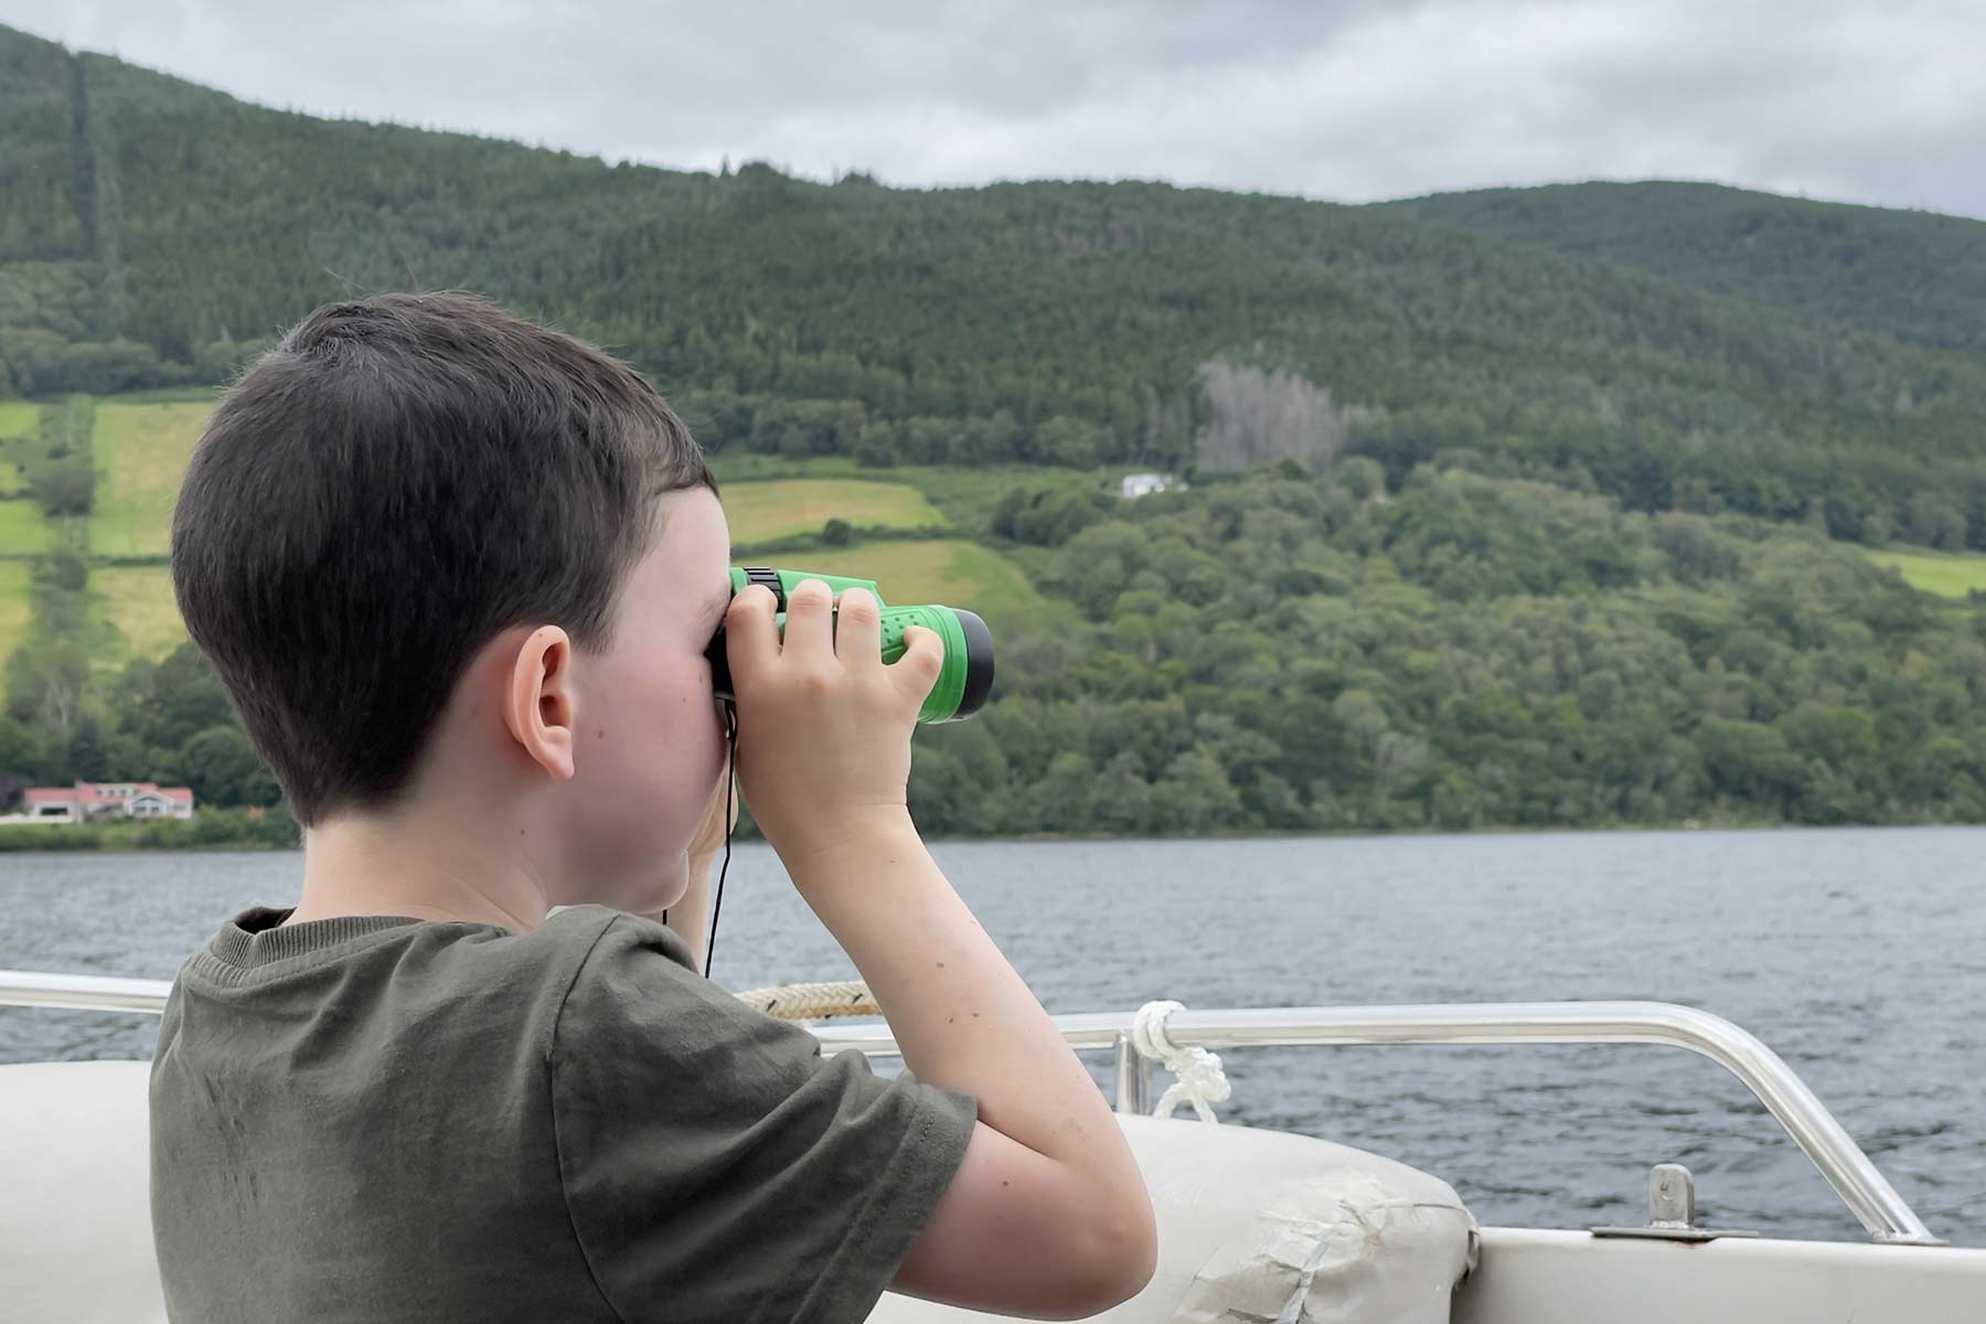 Harry searching for Nessie with his binoculars.